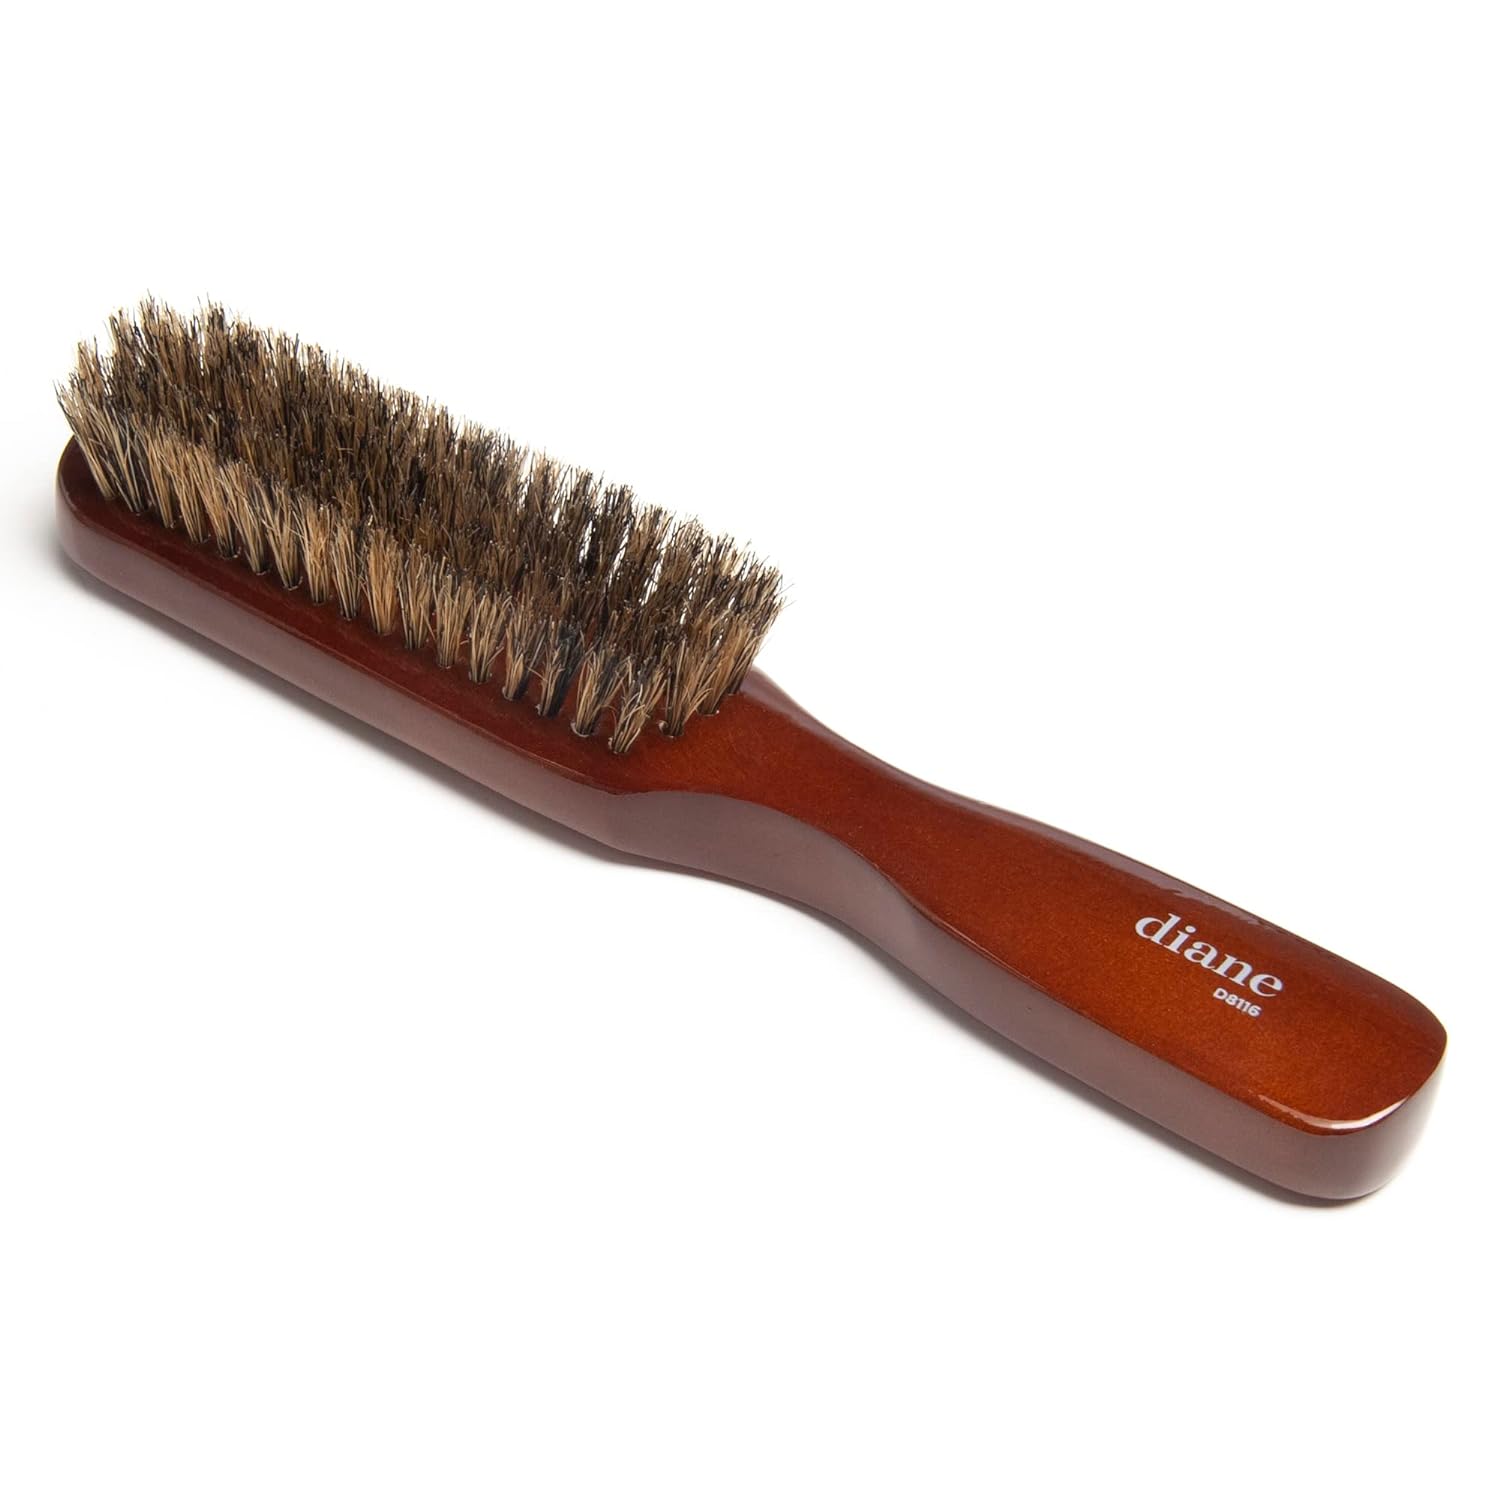 Diane Premium 100% Boar Bristle Styling Brush for Men and Barbers – Medium Bristles for Thick Coarse Hair – Use for Detangling, Smoothing, Wave Styles, Soft on Scalp, Restore Shine and Texture